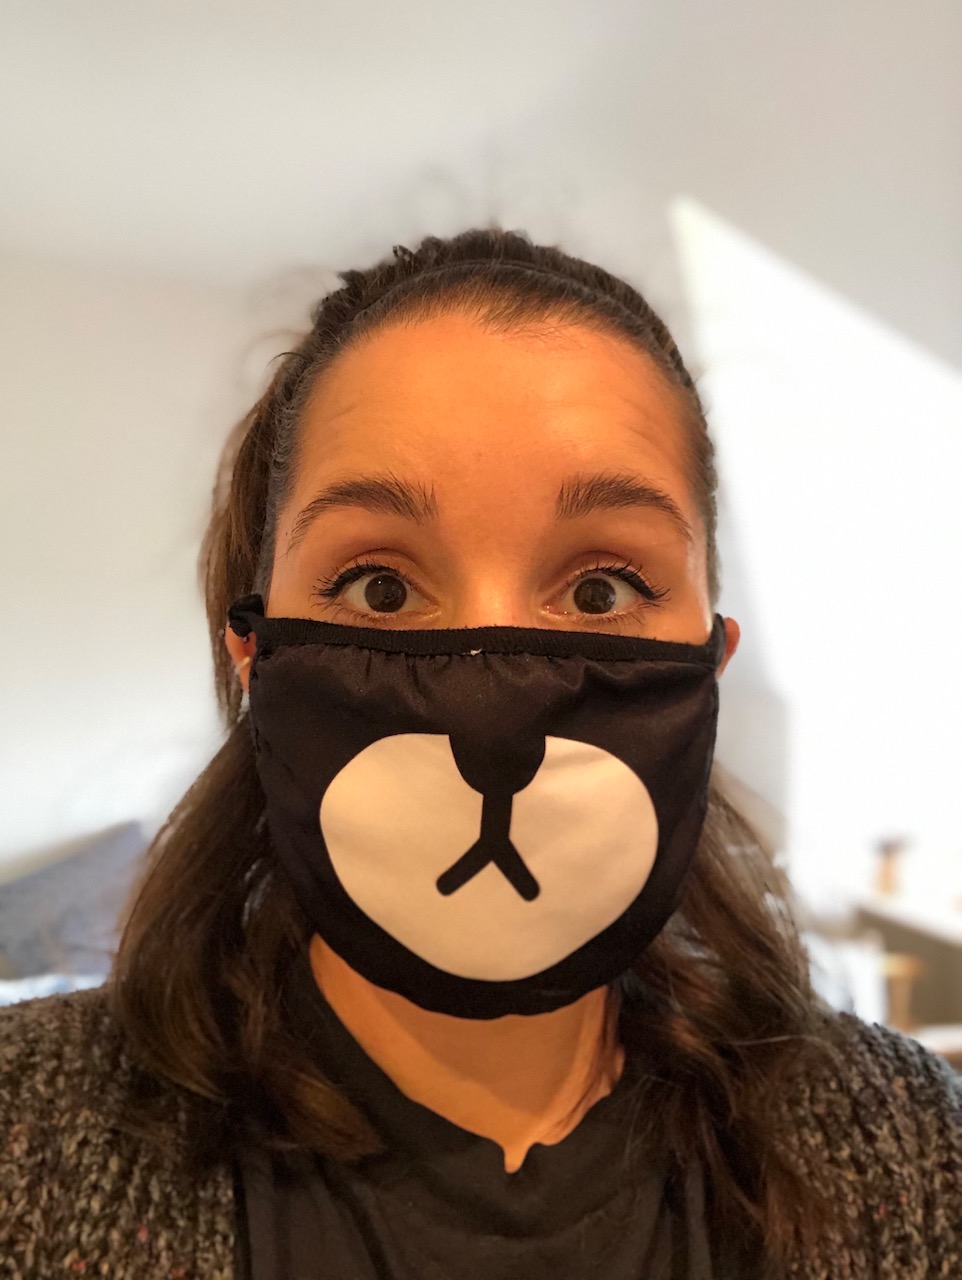 Selfie of me wearing a cloth face mask, decorated with a cartoon bear nose and mouth covering my own nose and mouth.